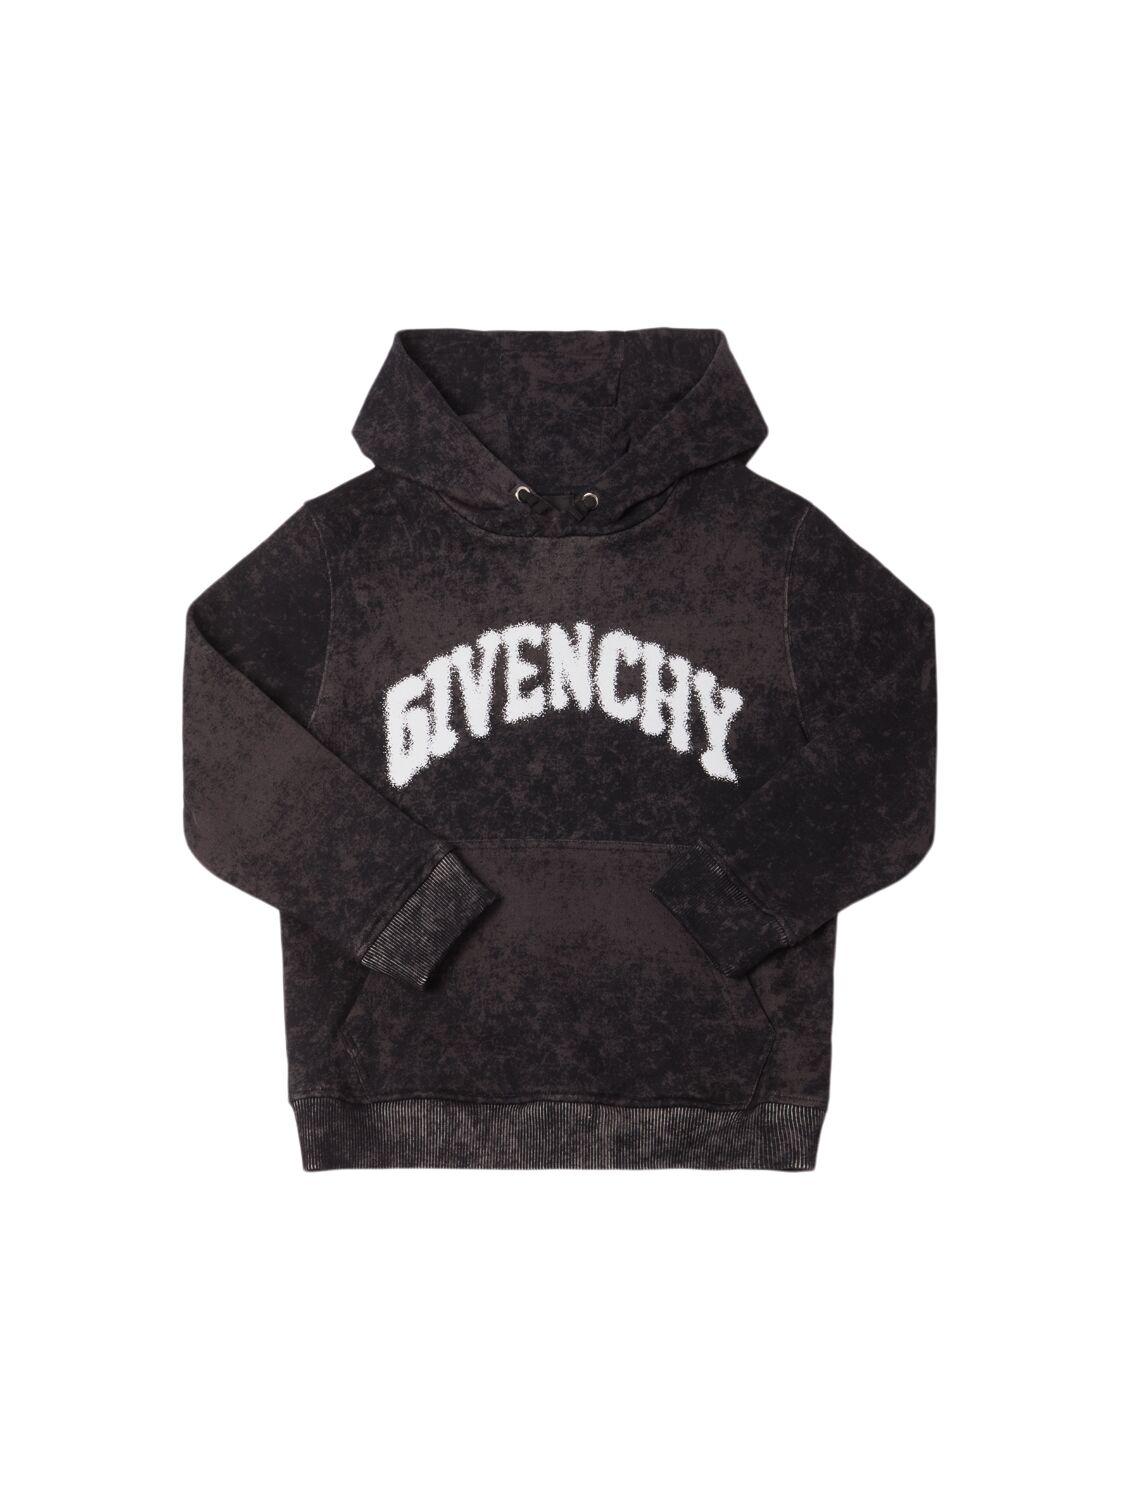 Givenchy Printed Cotton Hooded Sweatshirt In Black